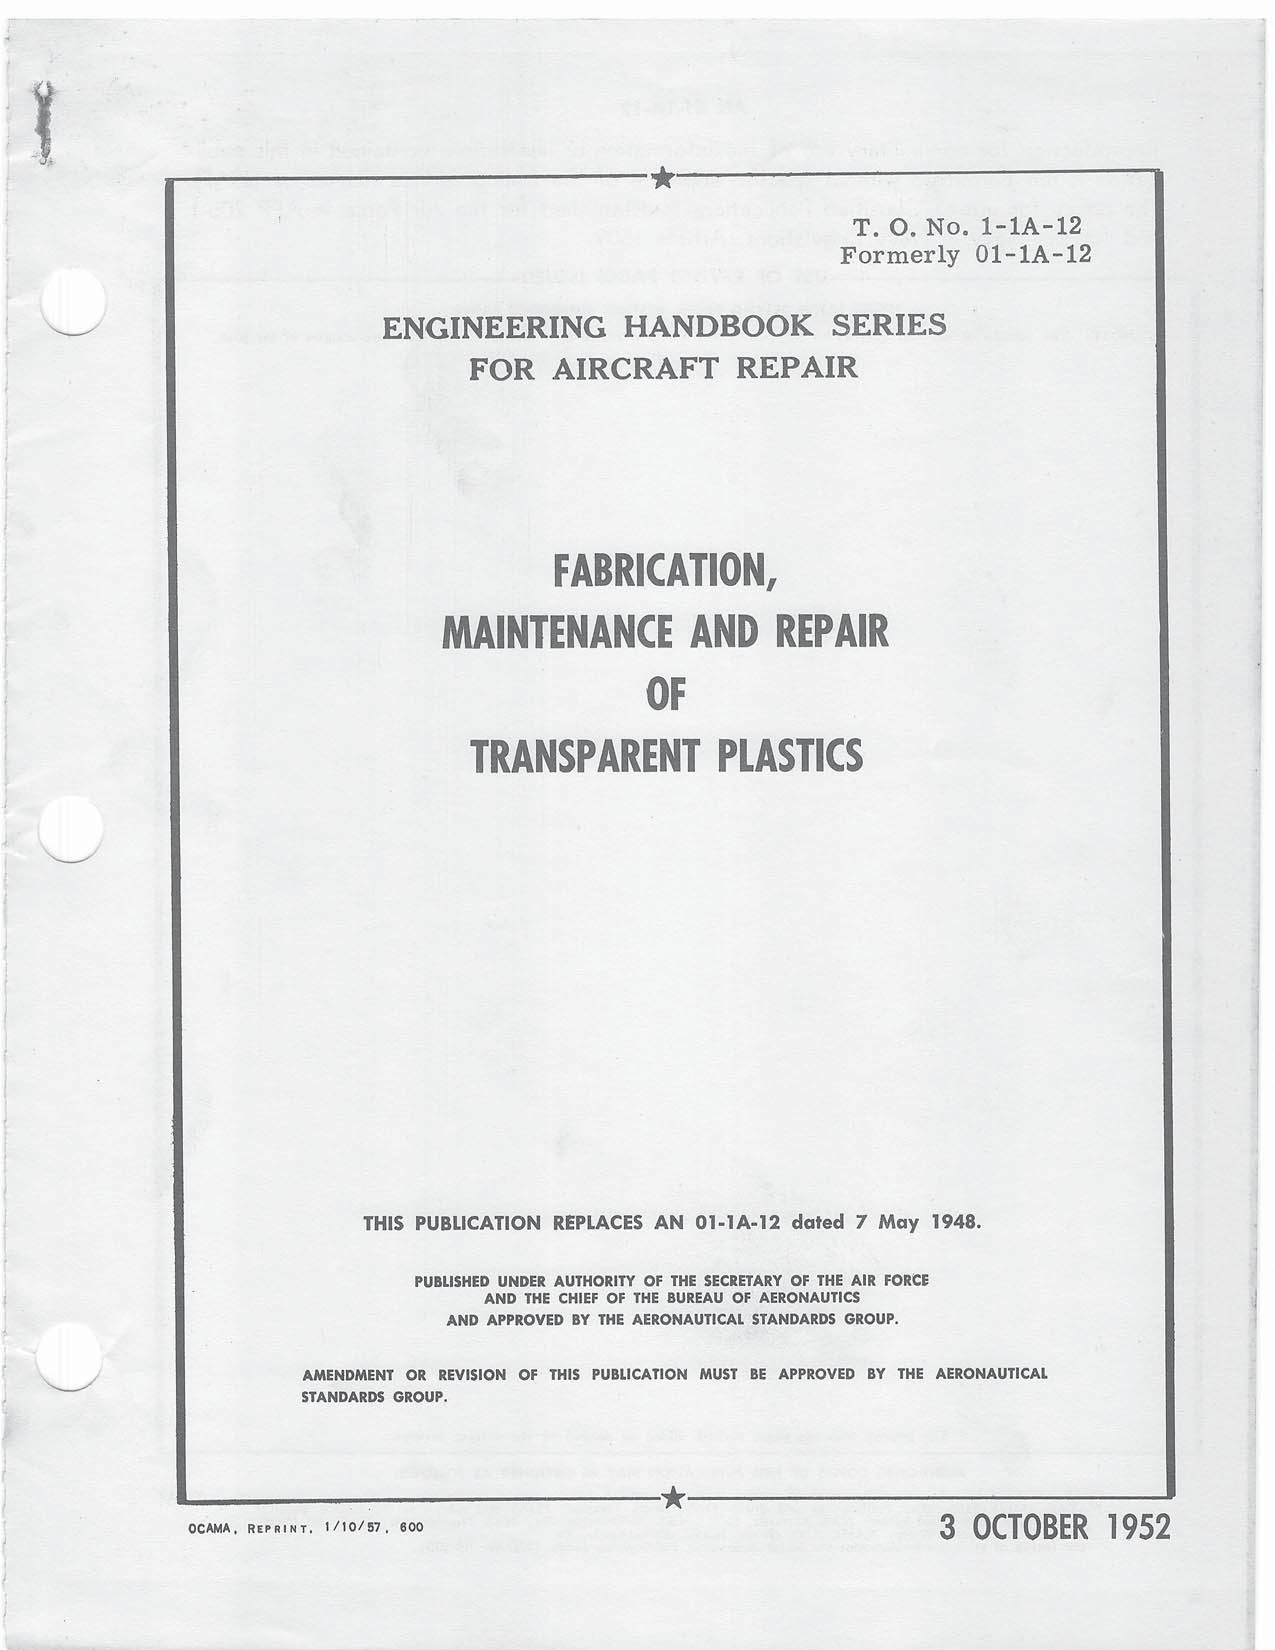 Sample page 1 from AirCorps Library document: General Fabrication, Maintenance and Repair of Transparent Plastics